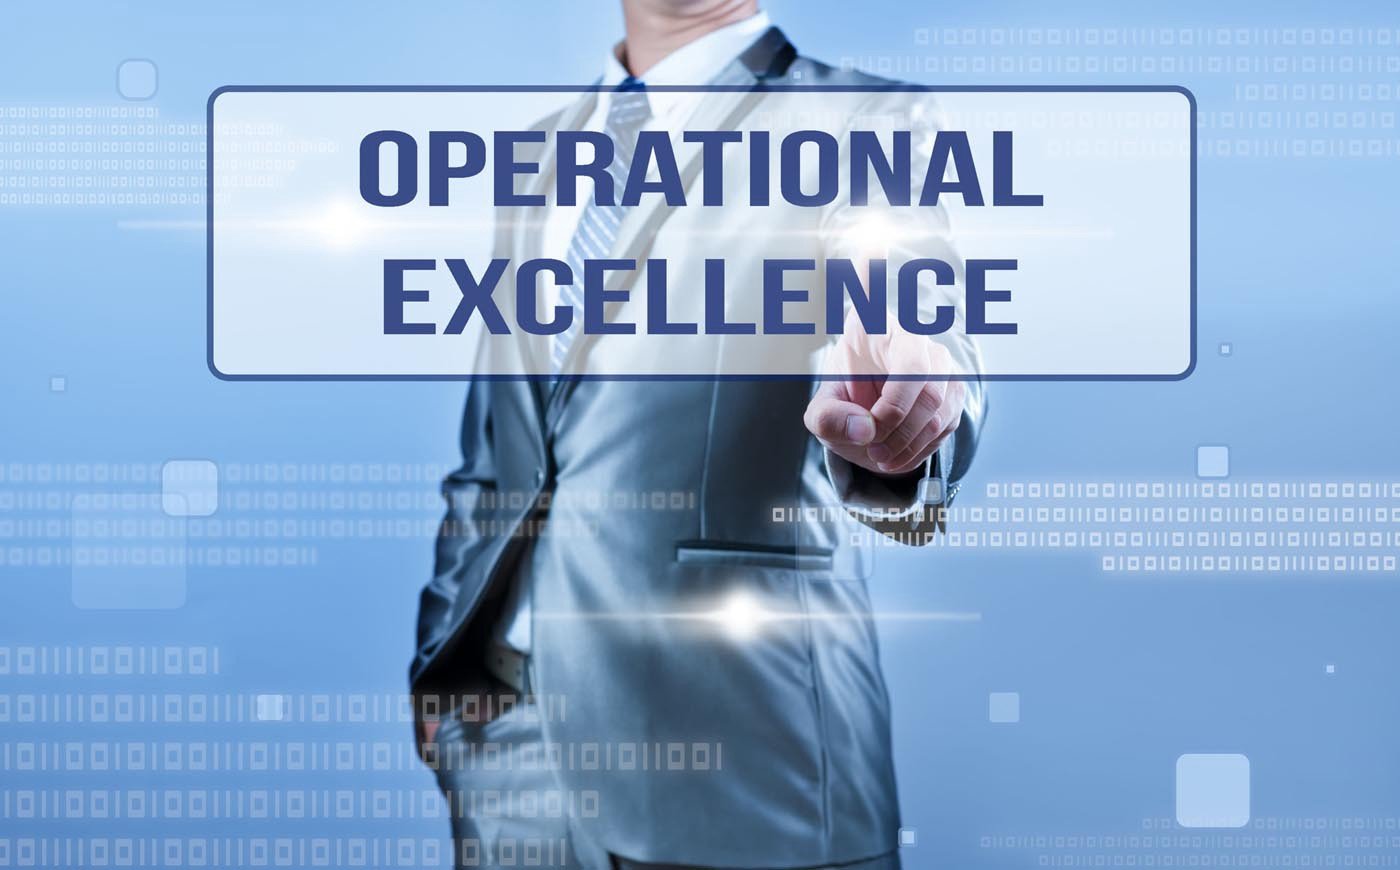 Free webinar in operational excellence